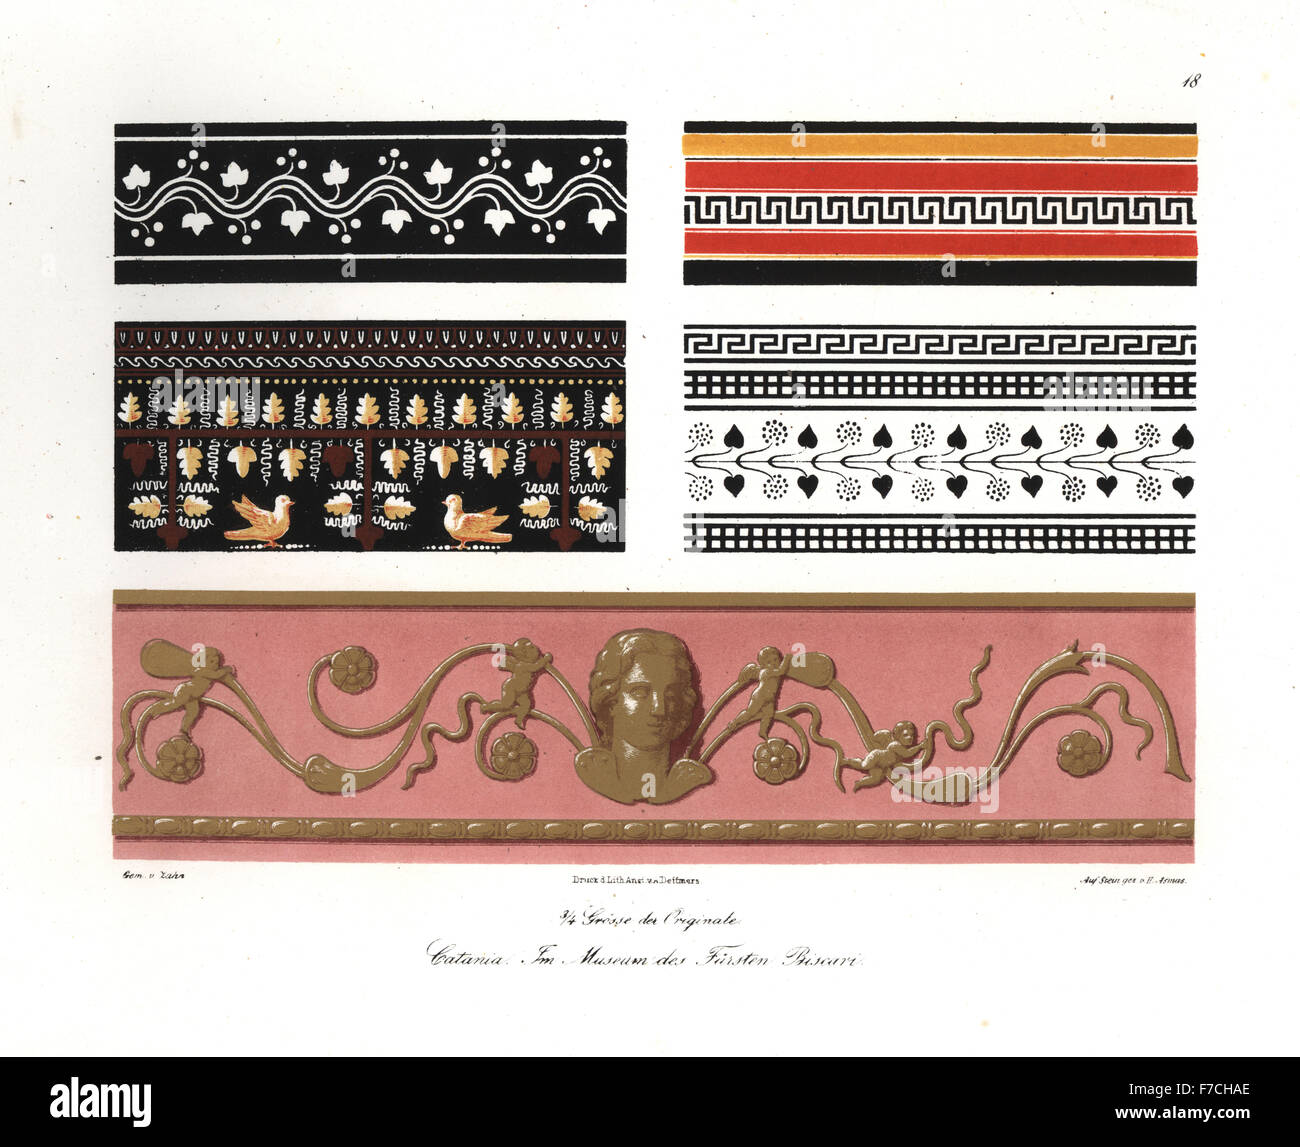 Wall paintings from the Museo Biscari, Catania, Italy, 17th century. Handcoloured lithograph by H. Asmus after an illustration by Wilhelm Zahn from his Ornament of All Classical Art Eras, Ornamente aller klassischen Kunst-Epochen, Reimer, Berlin, 1832. Stock Photo